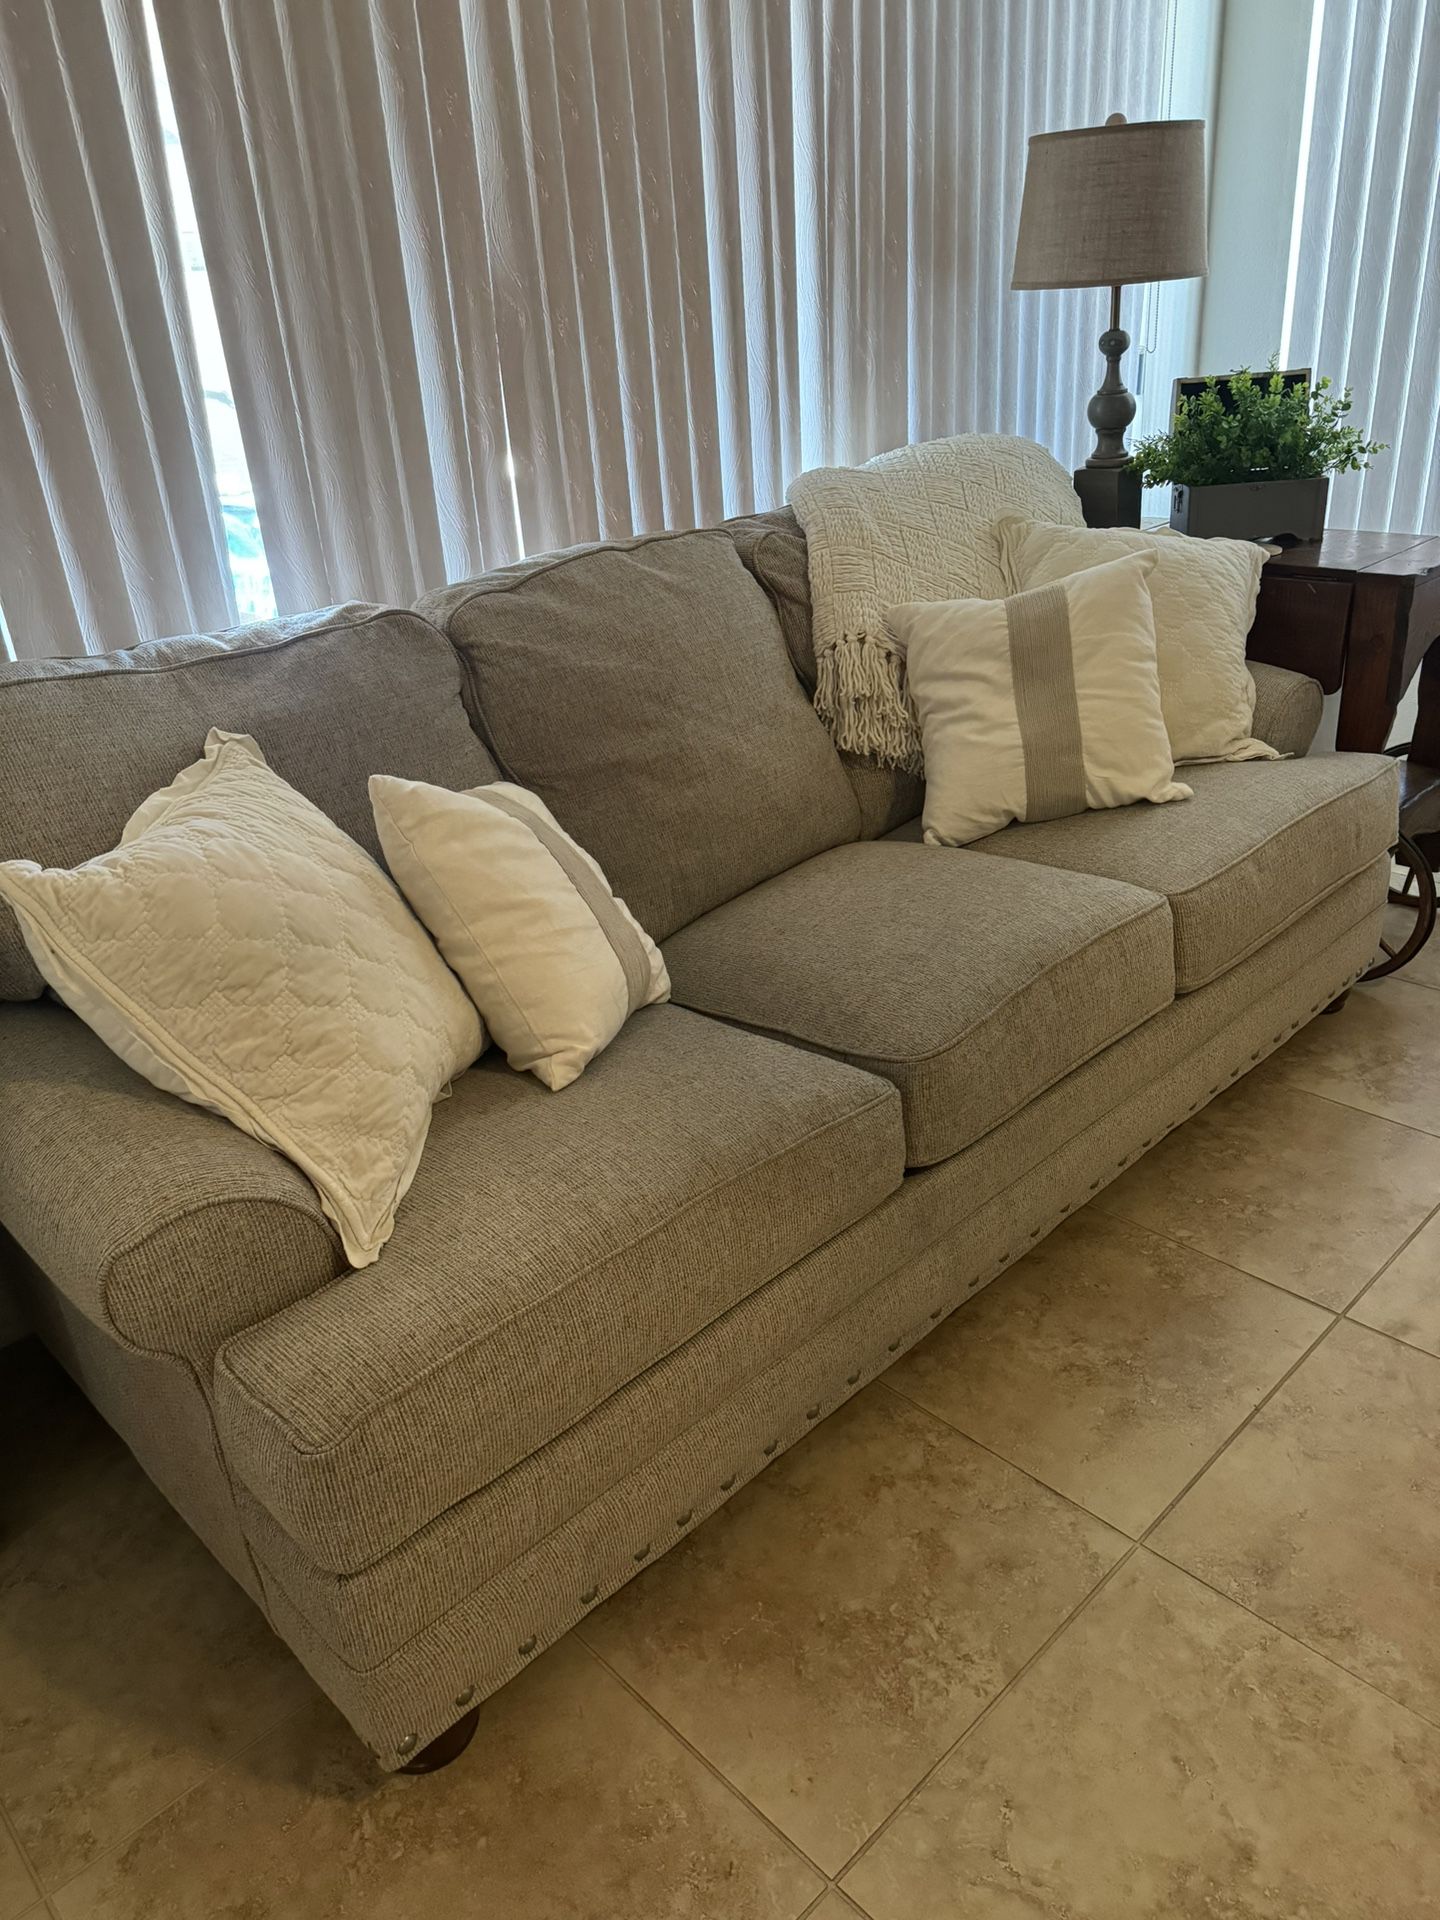 Beige / Grey Sofa / Couch